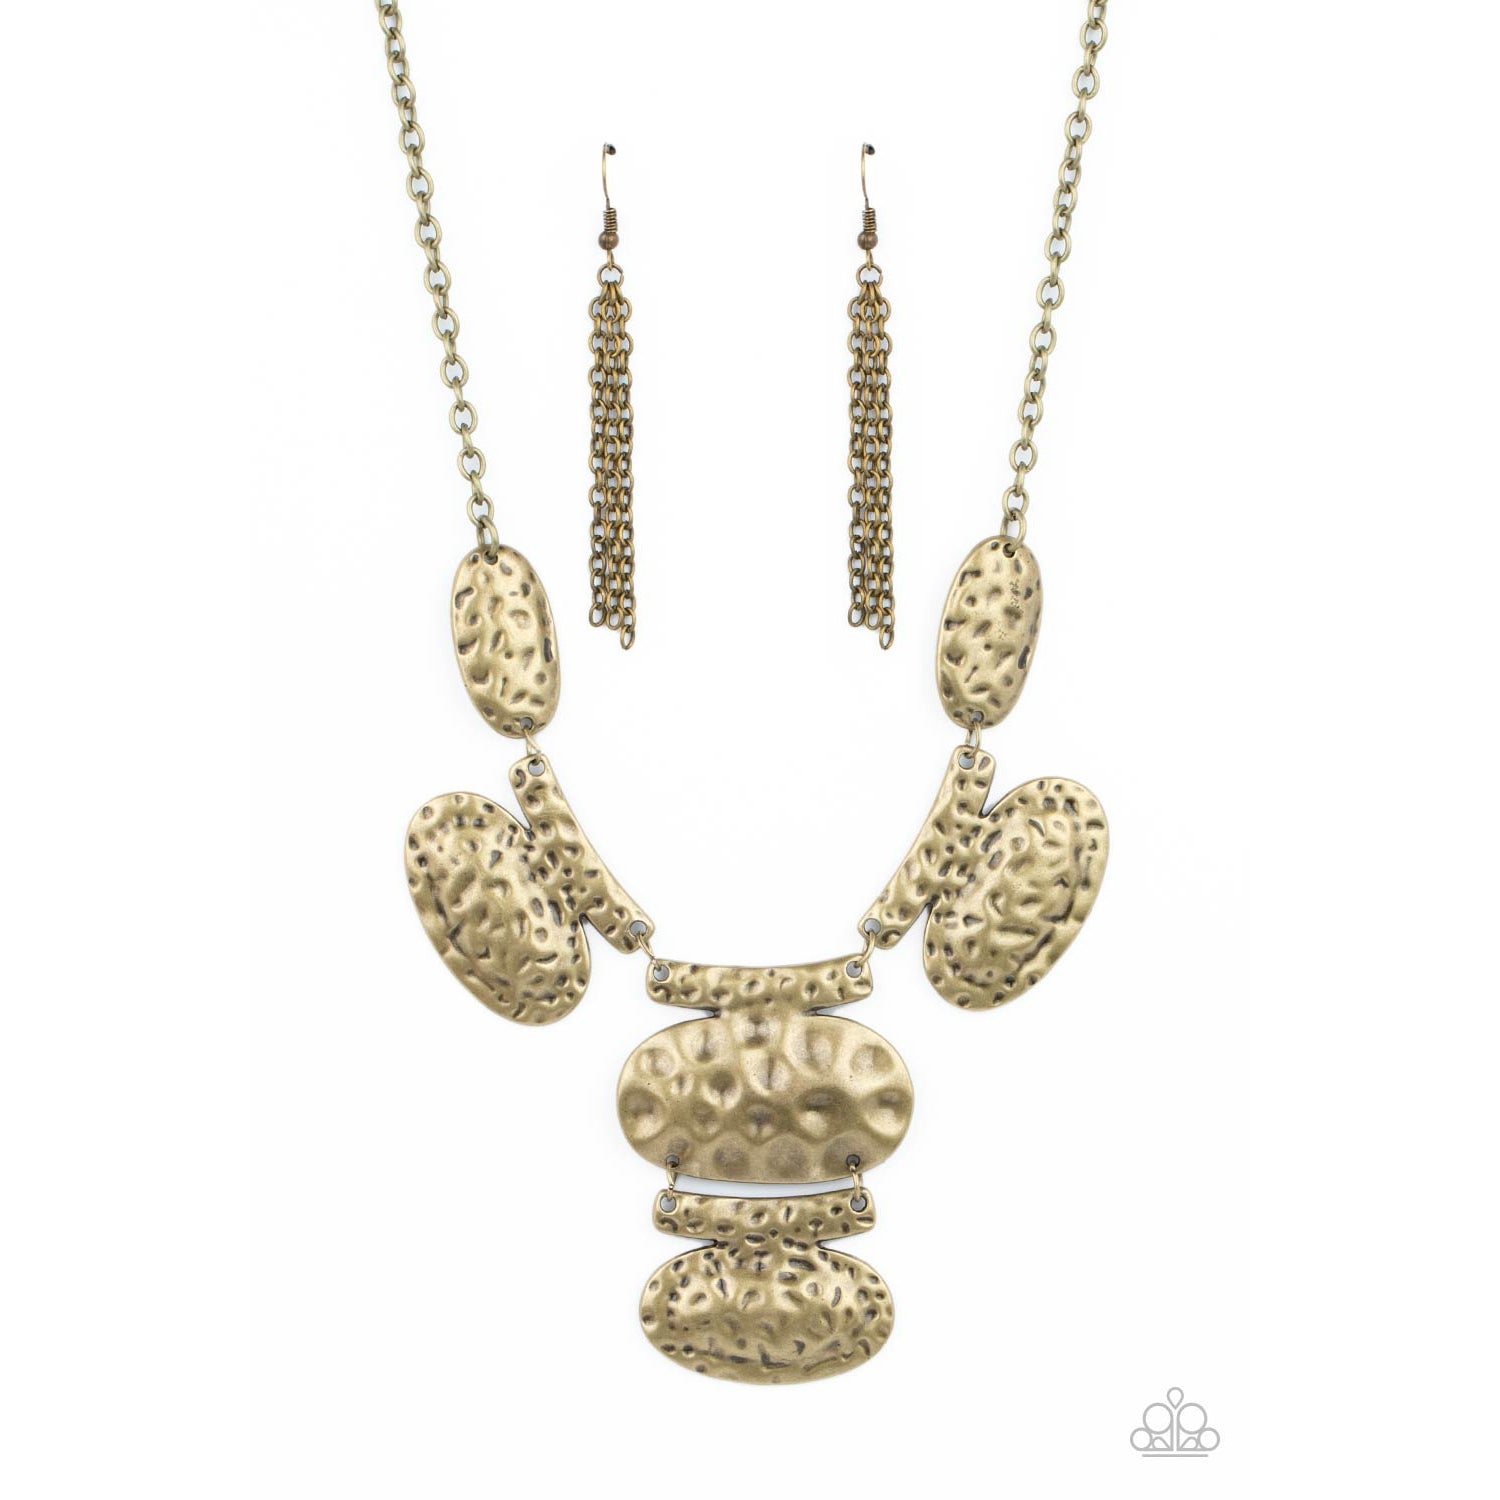 Gallery Relic - Brass Necklace - Paparazzi Accessories - GlaMarous Titi Jewels